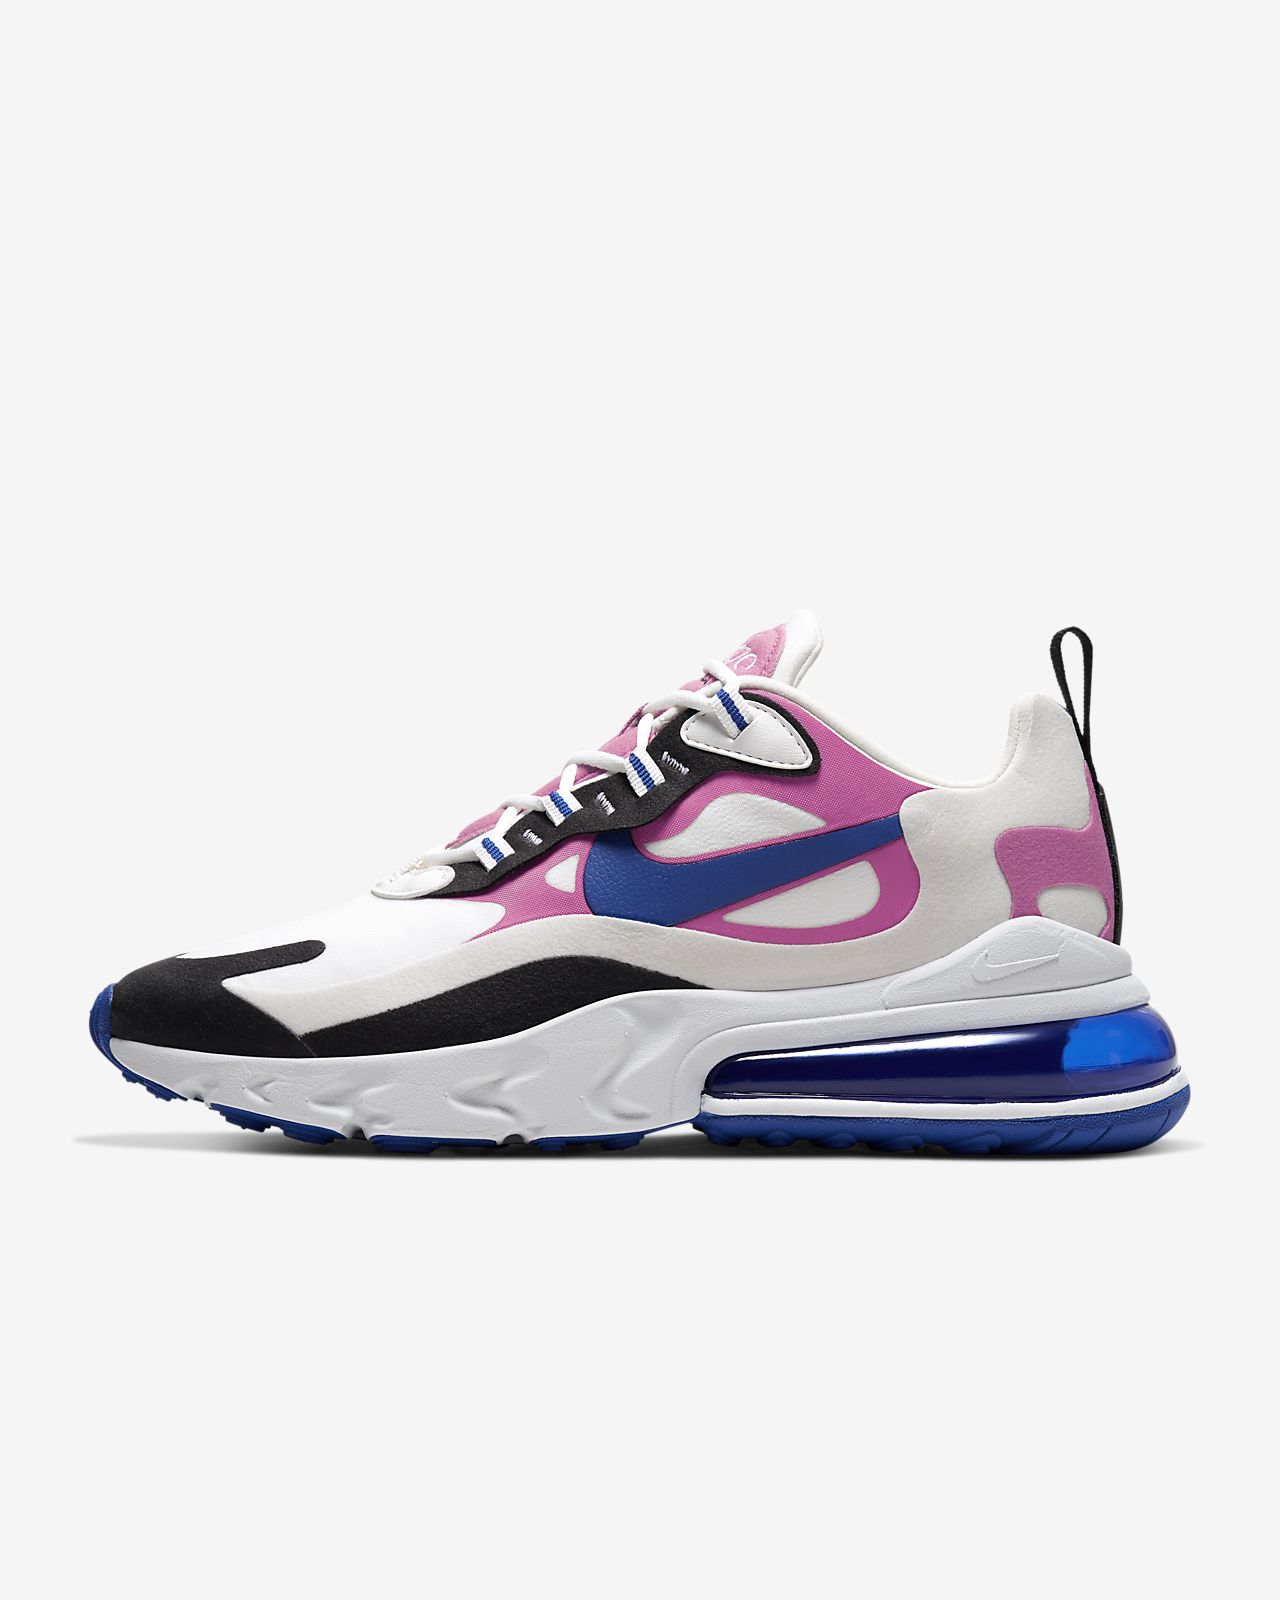 nike 270 react pink and blue